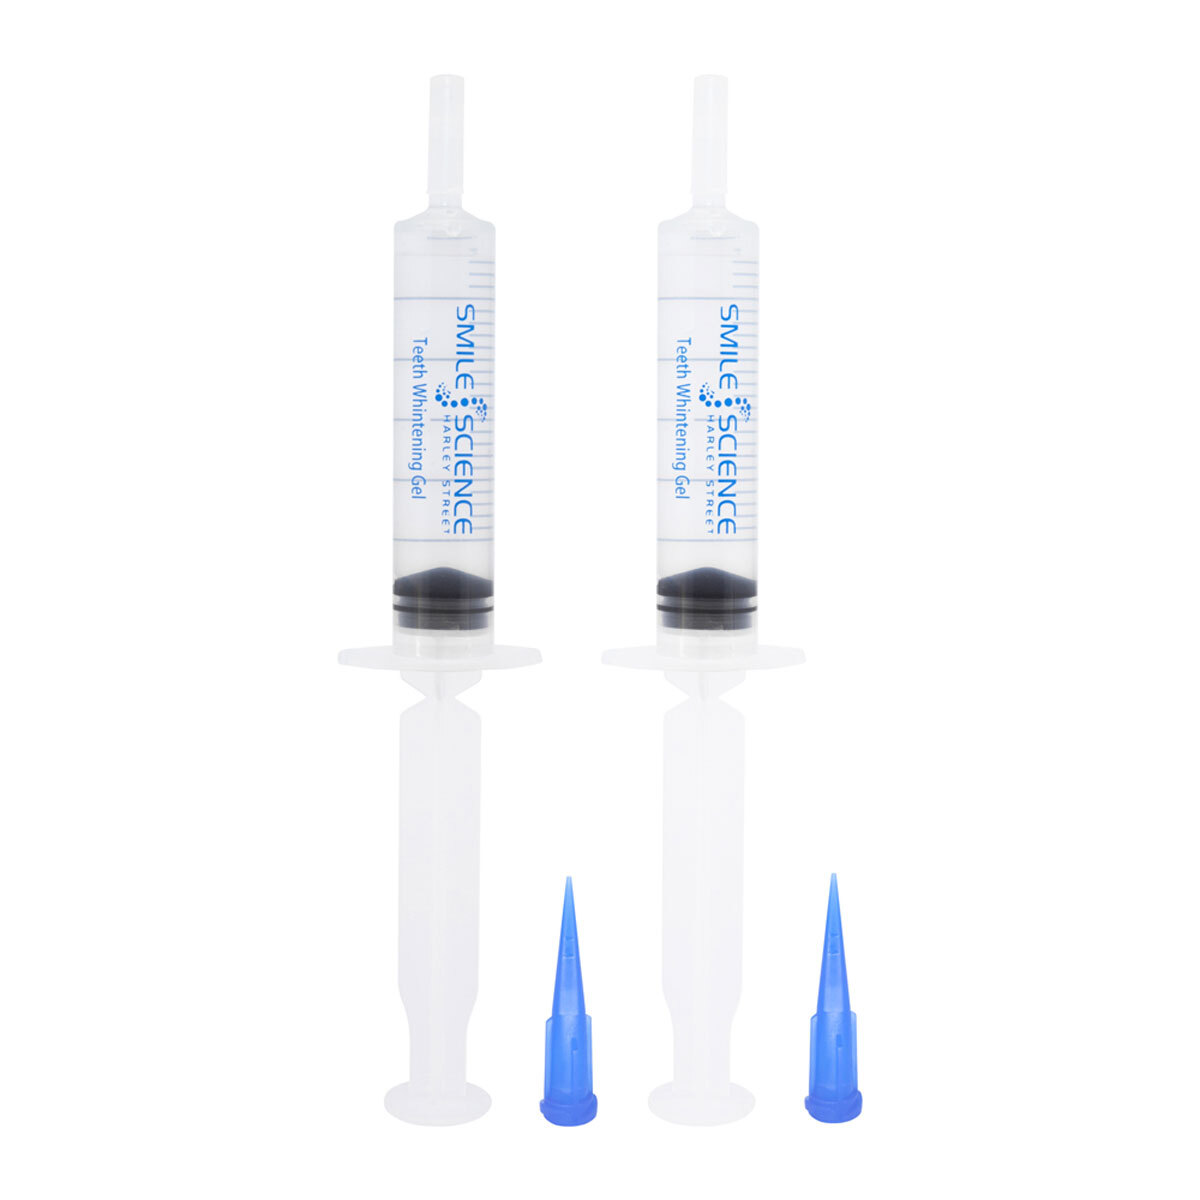 Individual Parts of the Teeth Whitening Kit